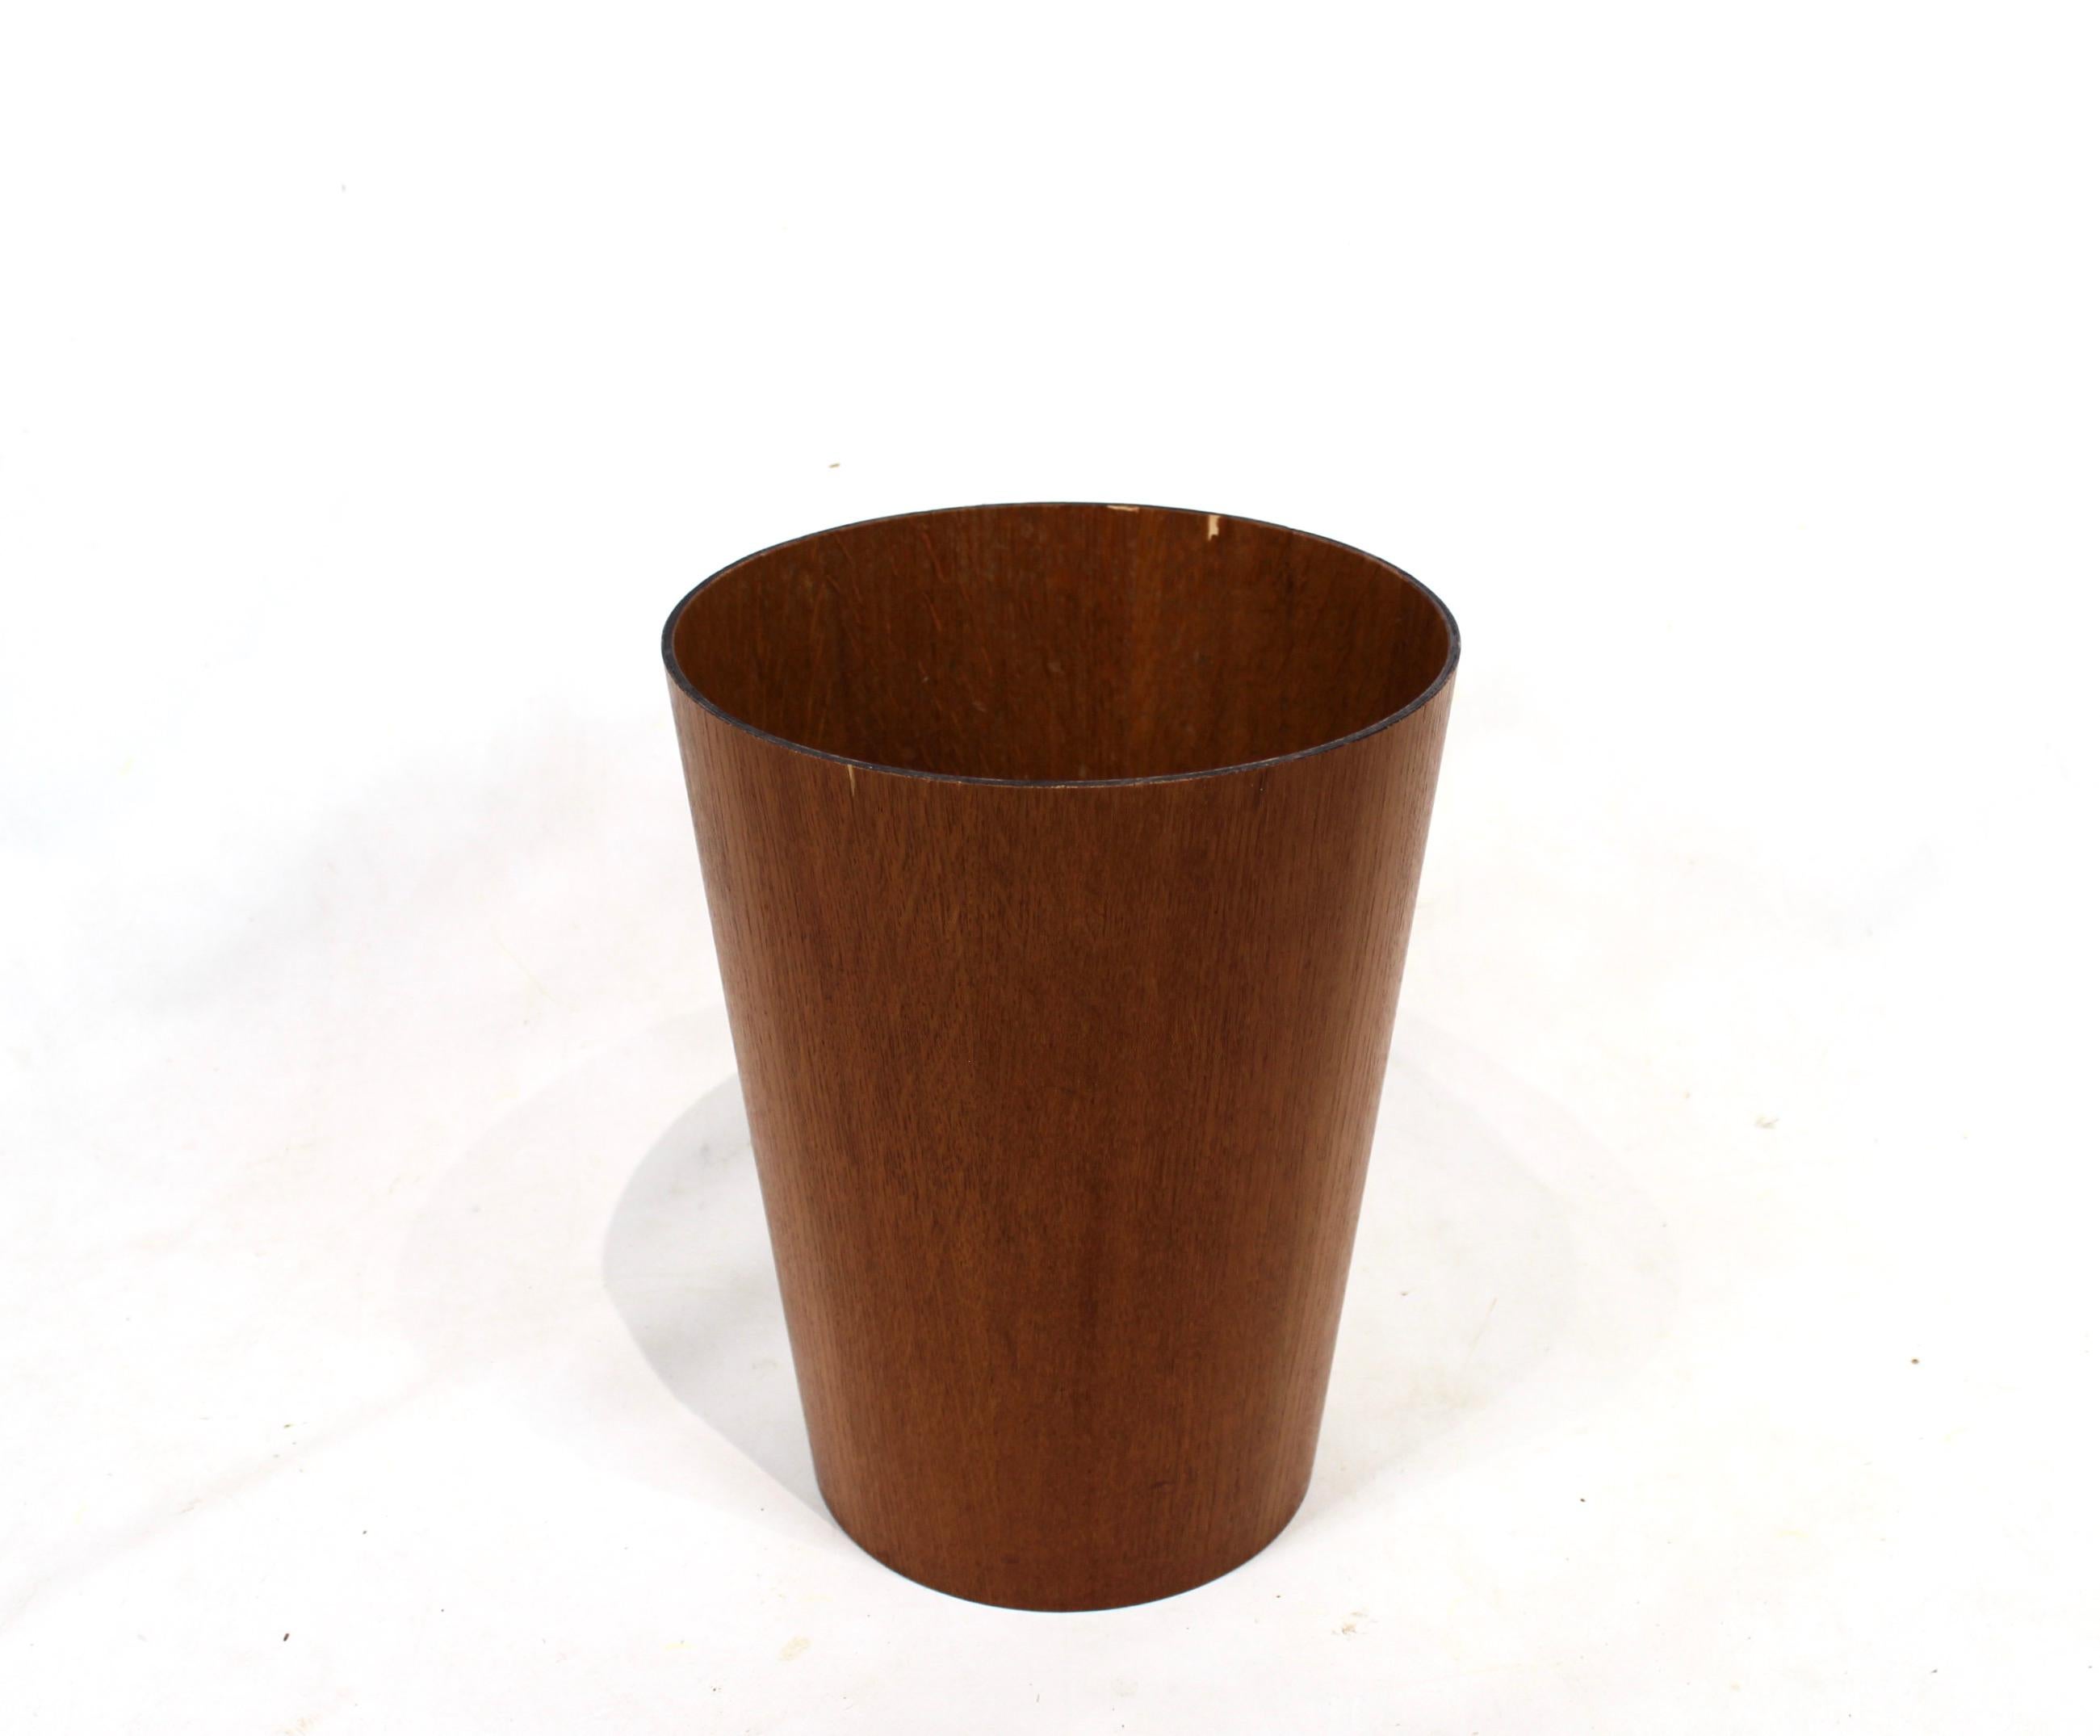 Bucket in teak of Swedish design Servex from the 1960s. The item is in great vintage condition.